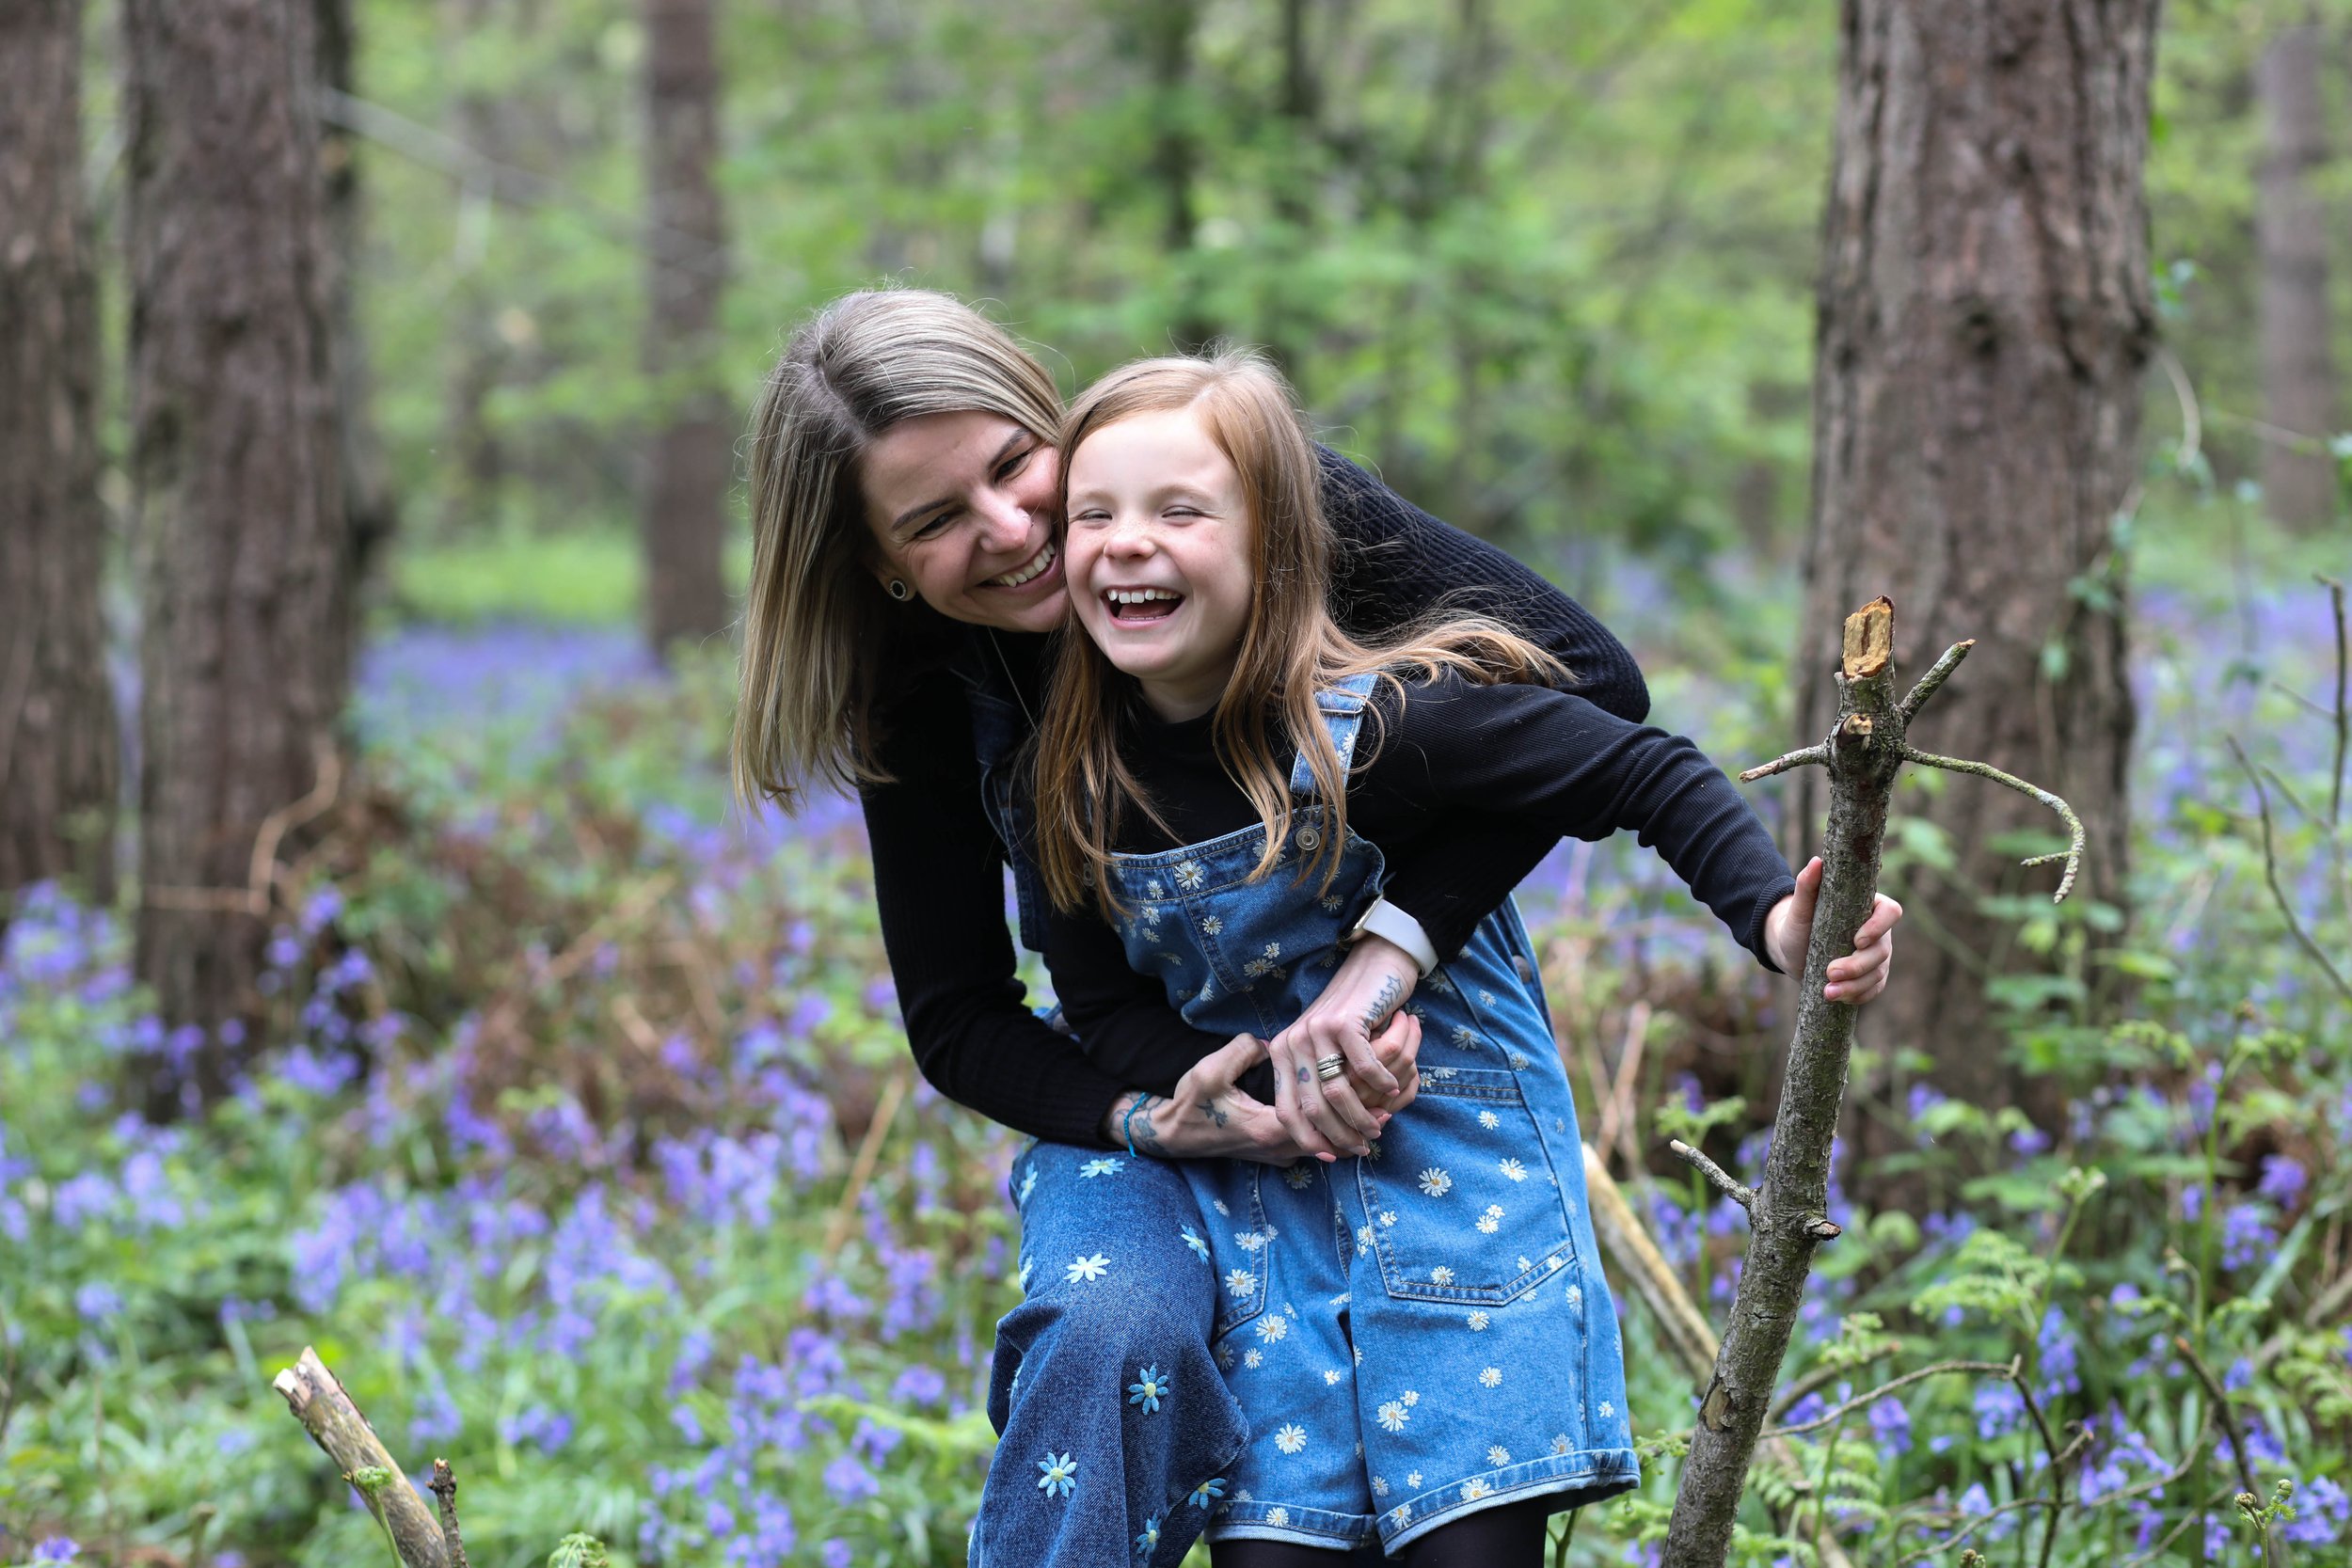 MUM AND DAUGHTER PHOTO SHOOT IN THE BLUEBELLS | BERKSHIRE PORTRAIT SHOOTS30 choice .JPG